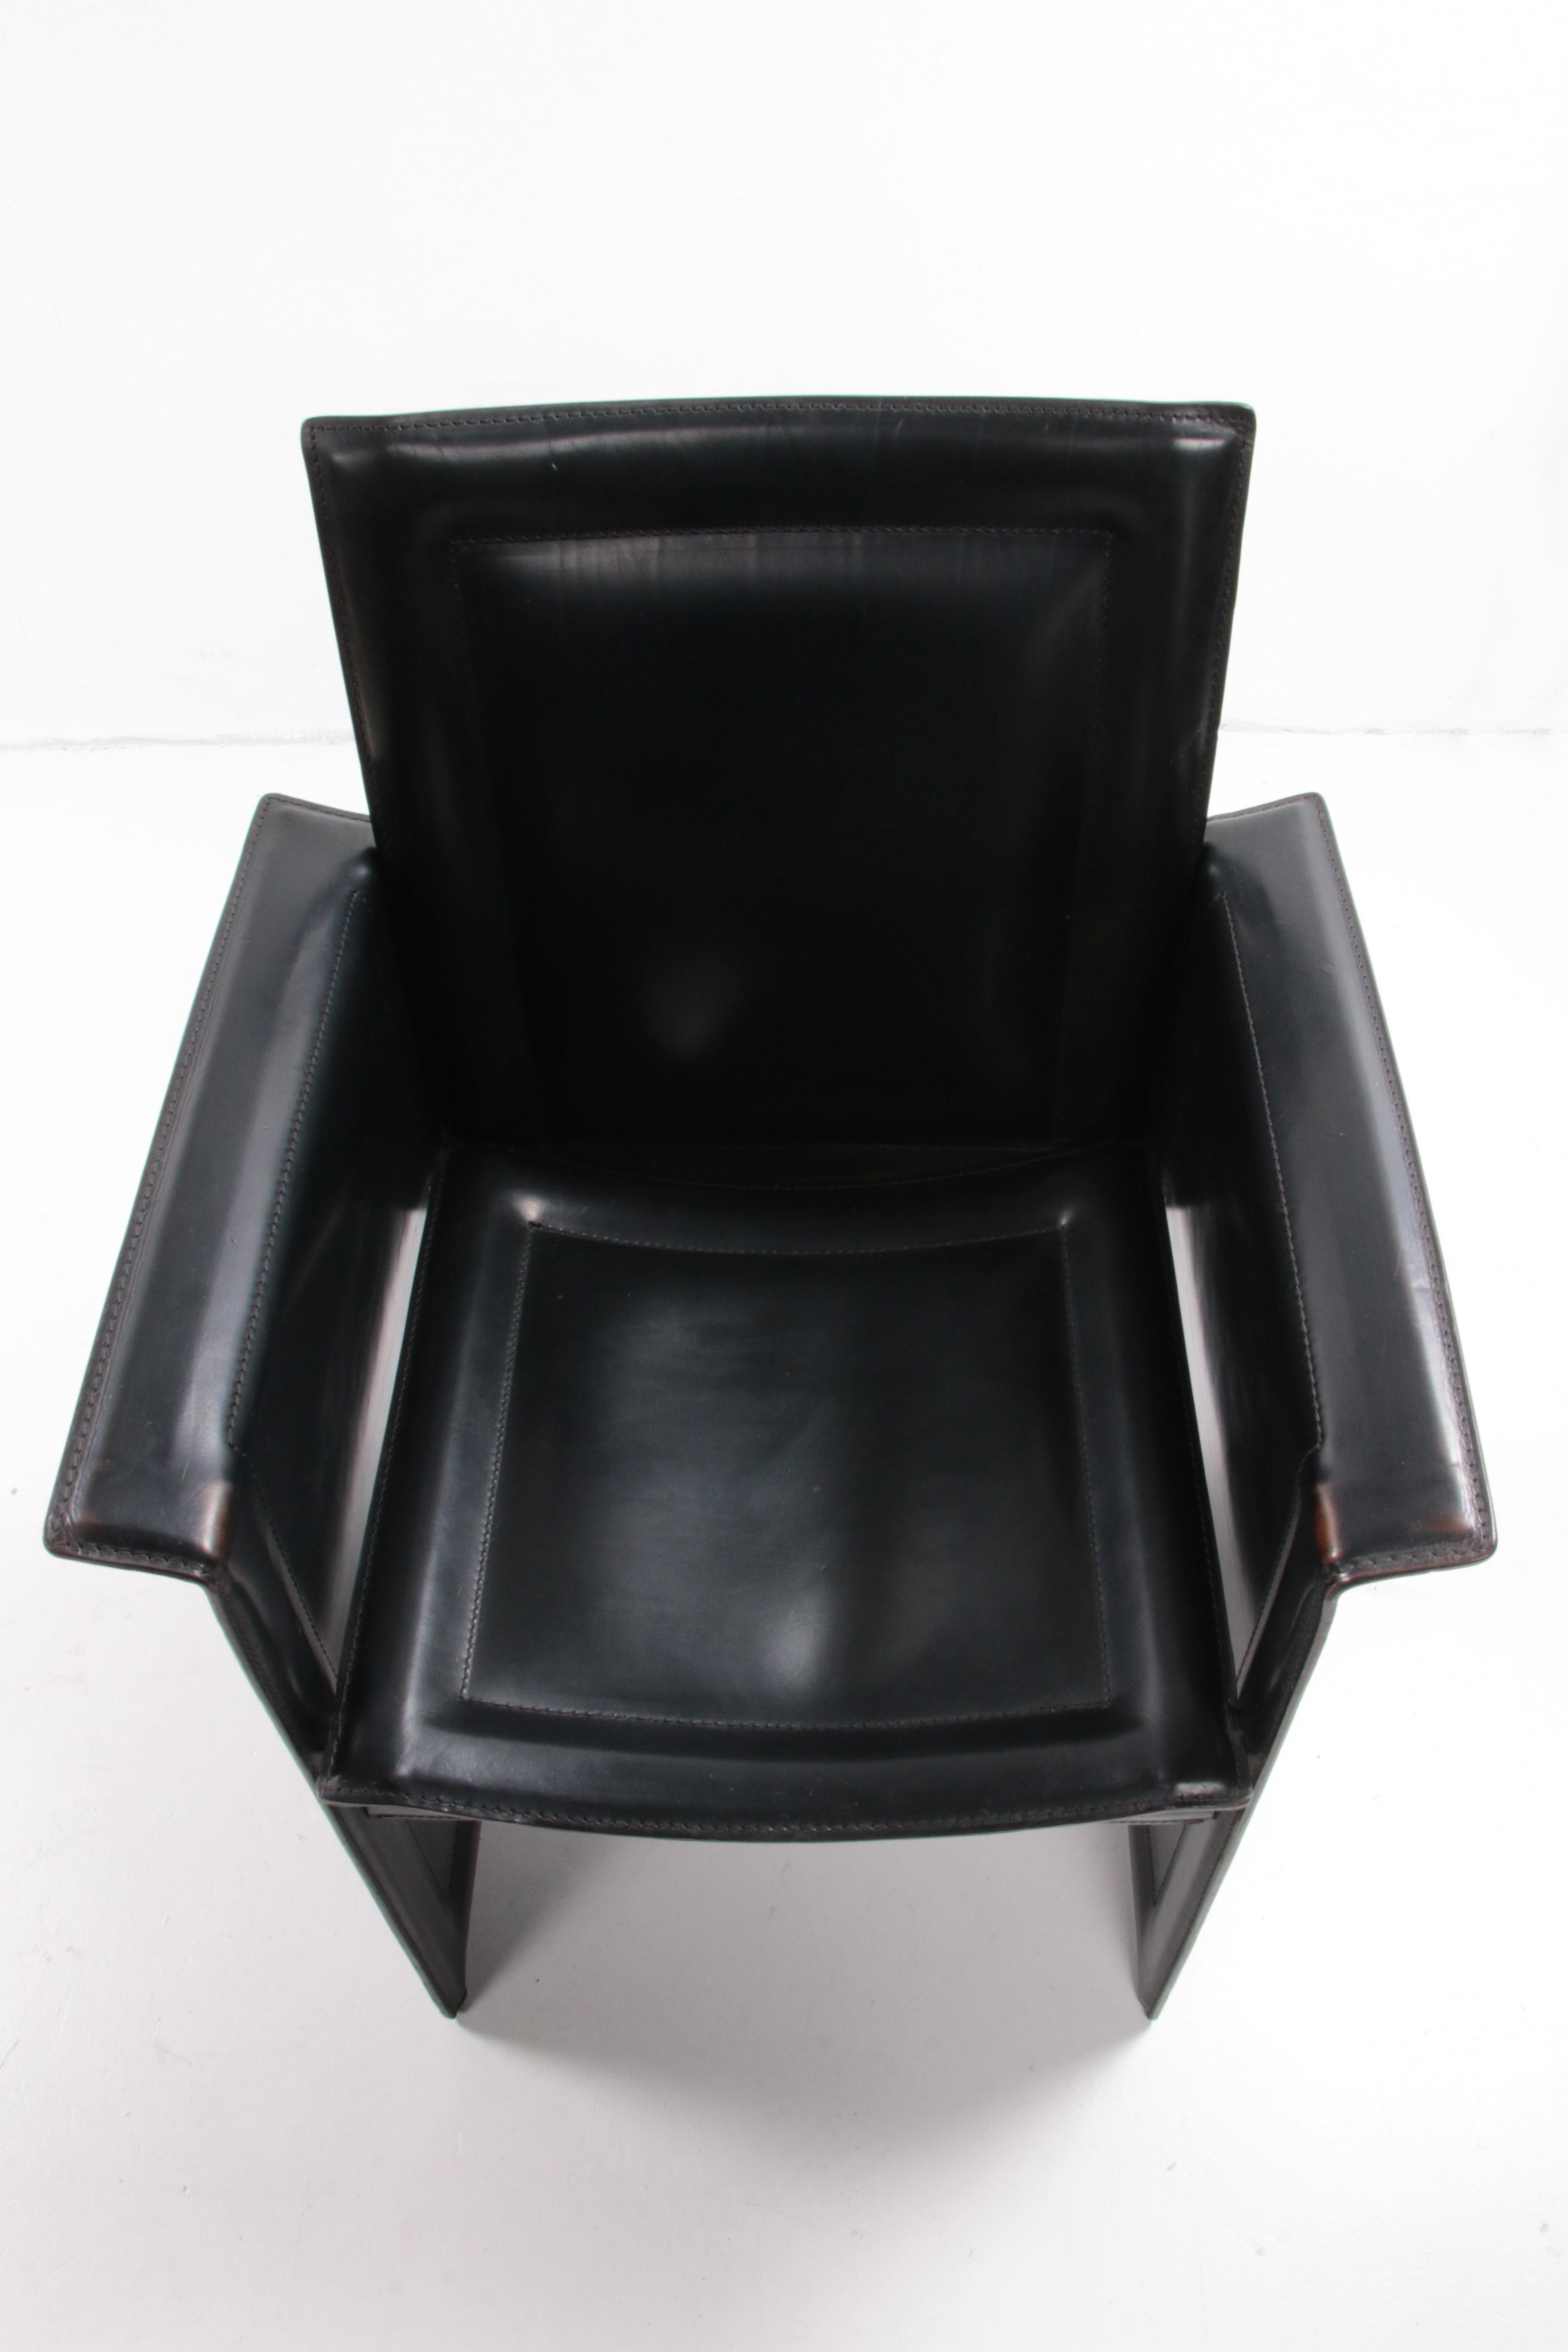 Solaria Leather Set of 4 Dining Chairs made by Arrben, 1970 Italy. For Sale 8